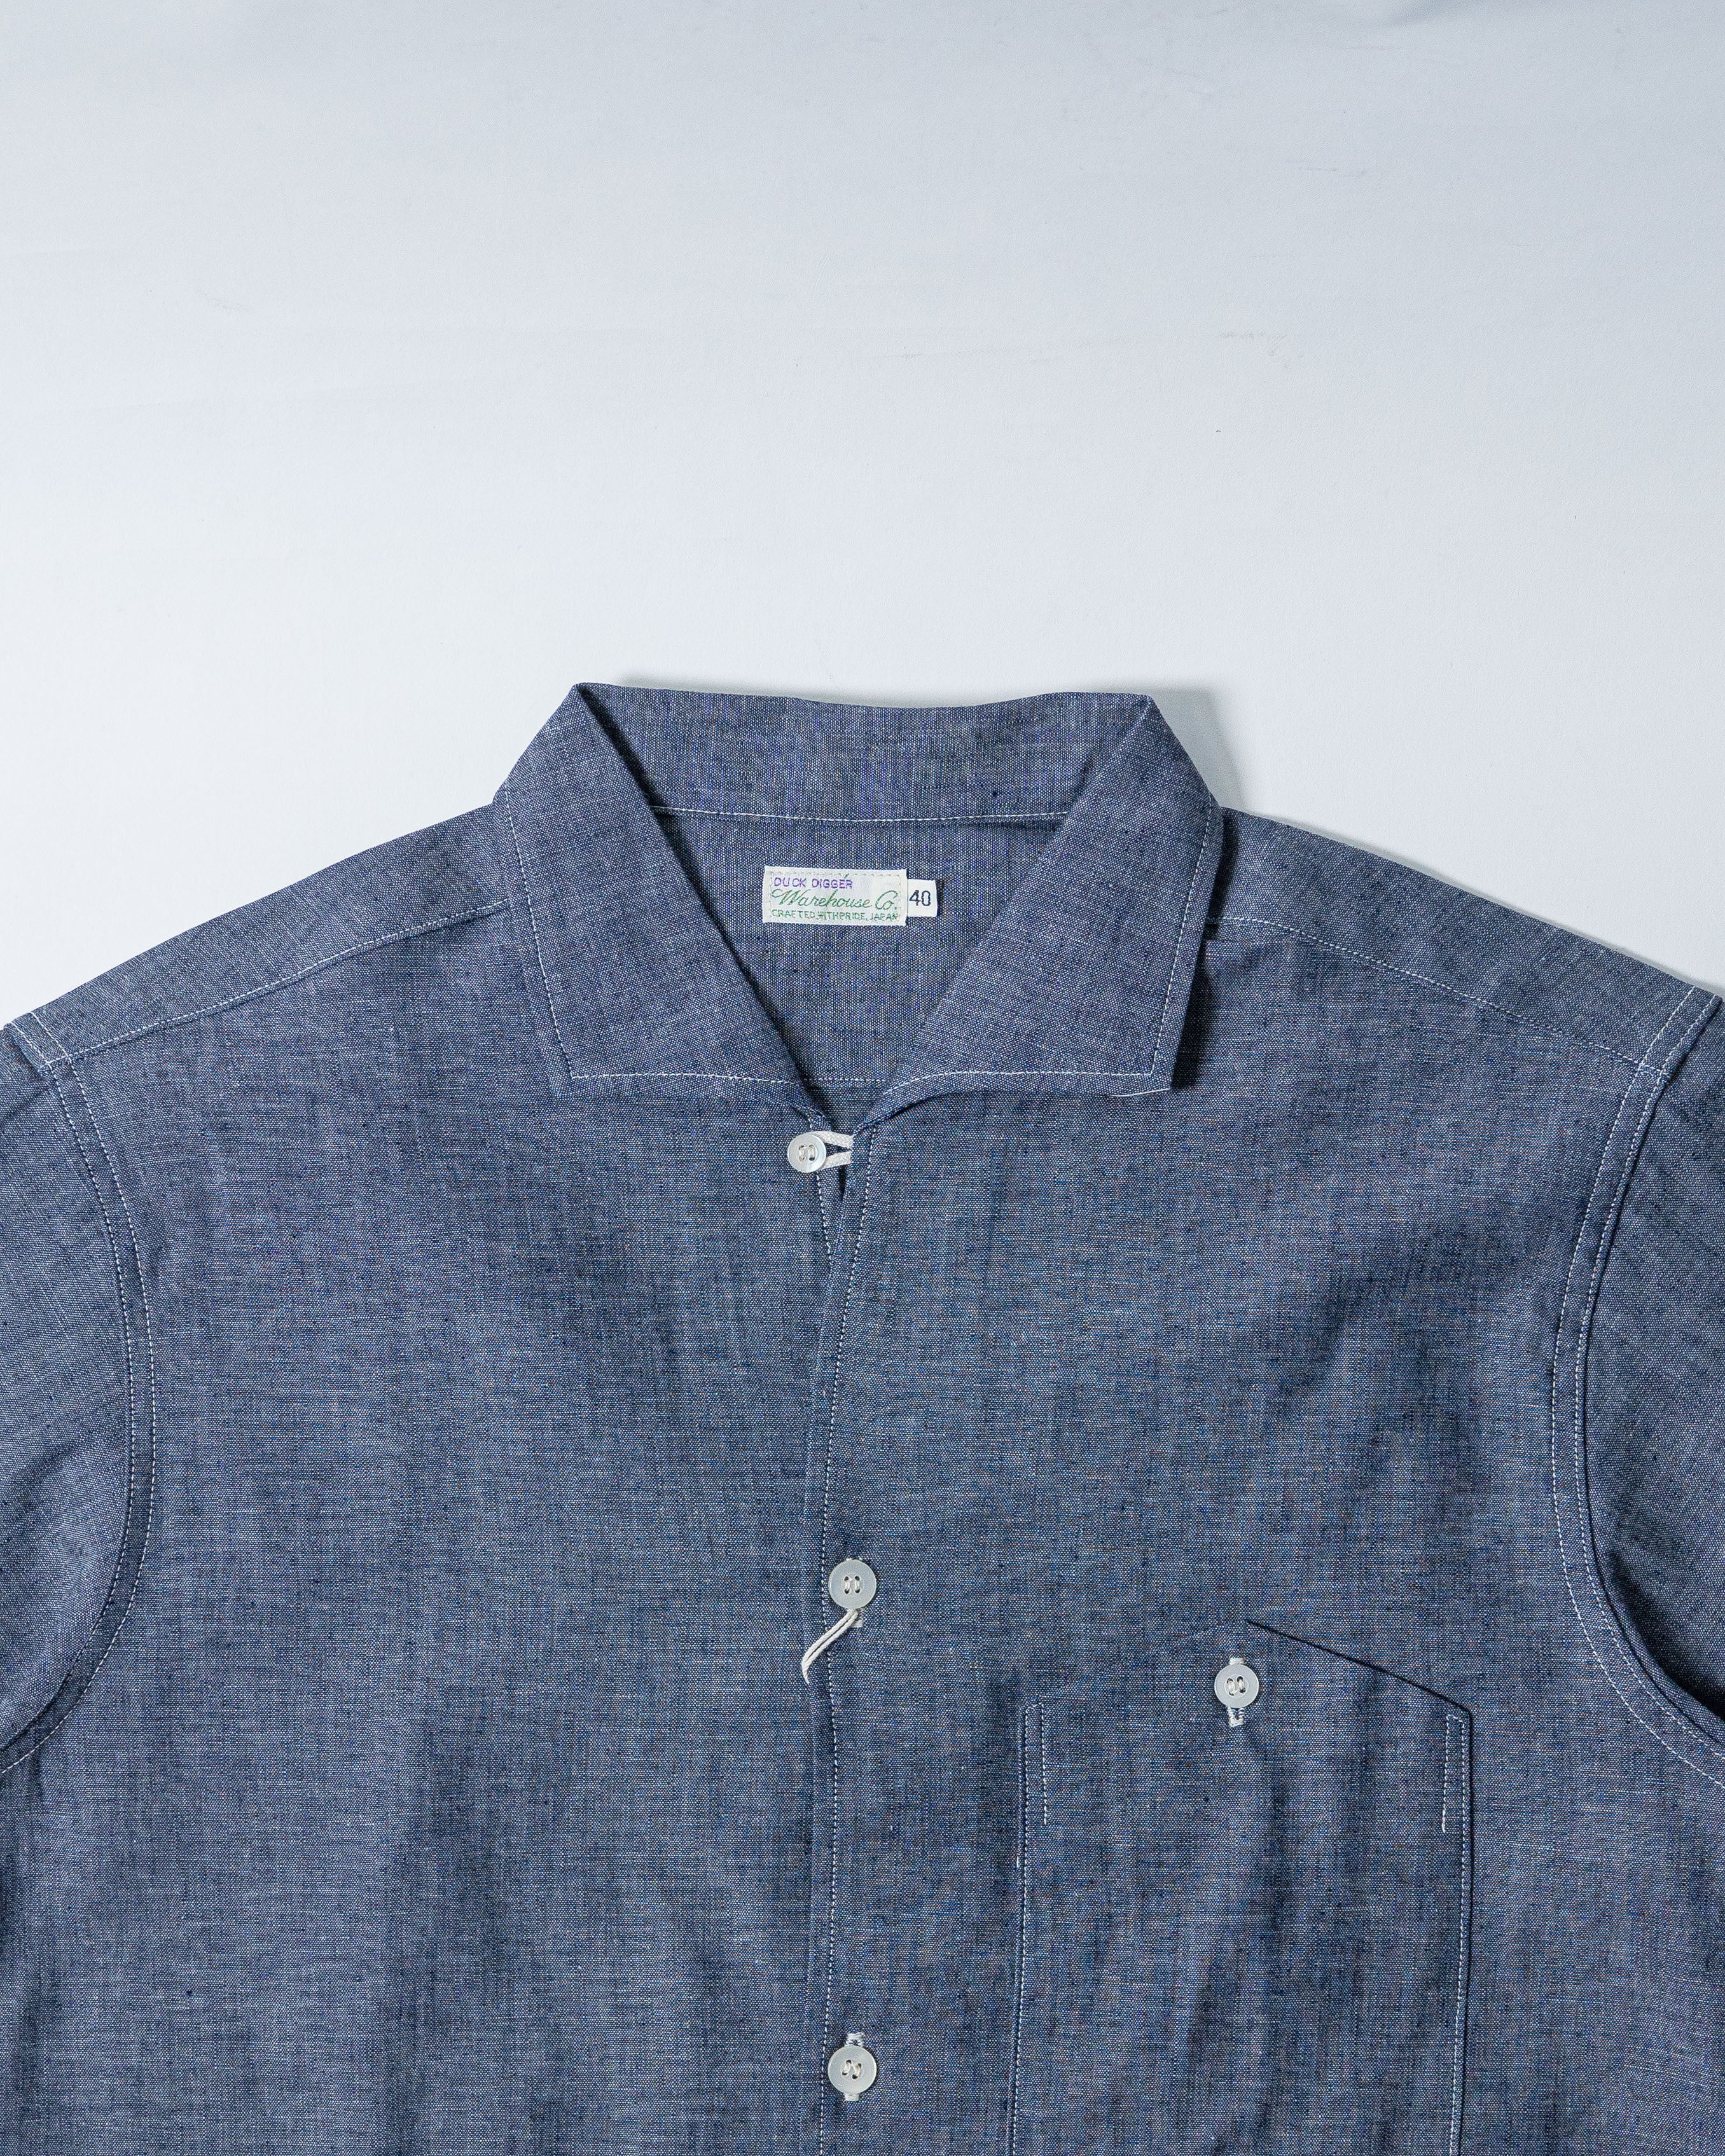 S/S Open Collar Shirts 3091 | Navy Chambray